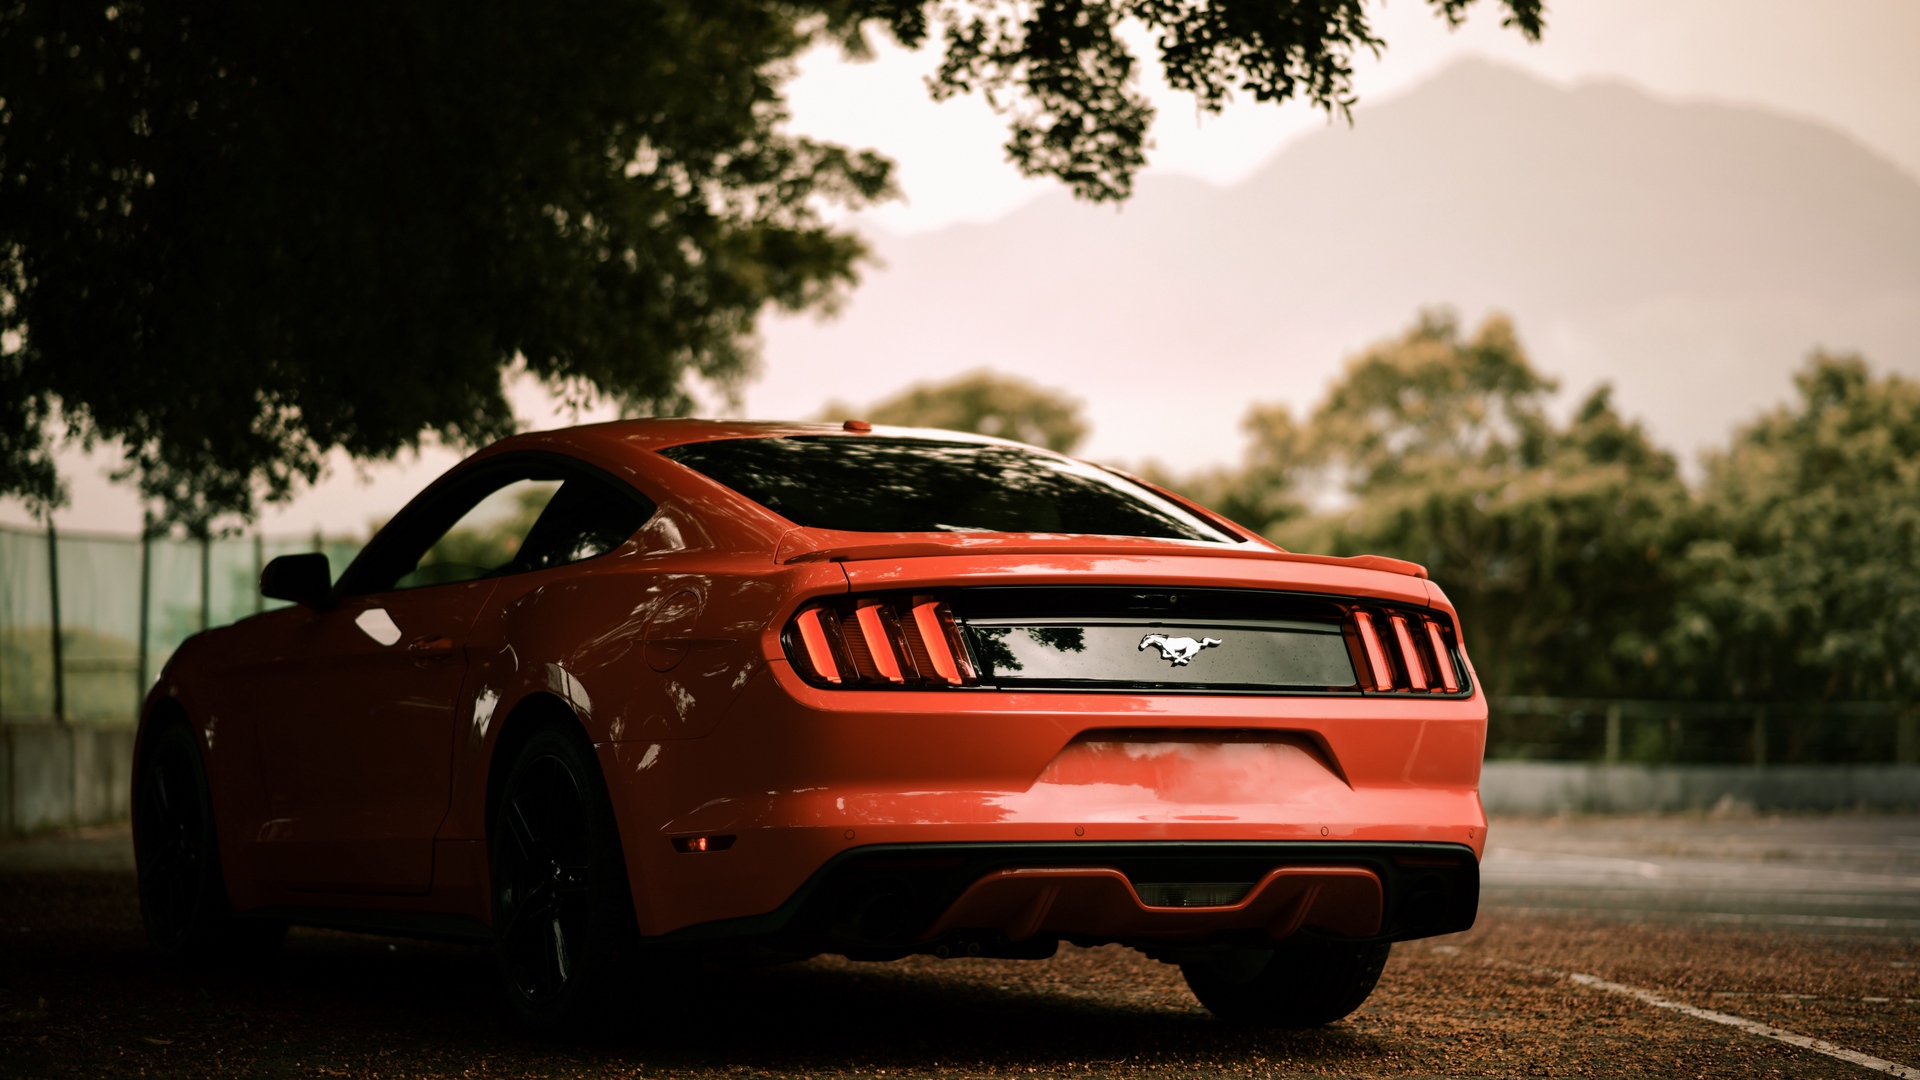 Wallpaper Ford Mustang, Ford, Car, Red, Rear View, - Rear Ford Mustang Wallpaper 4k - HD Wallpaper 